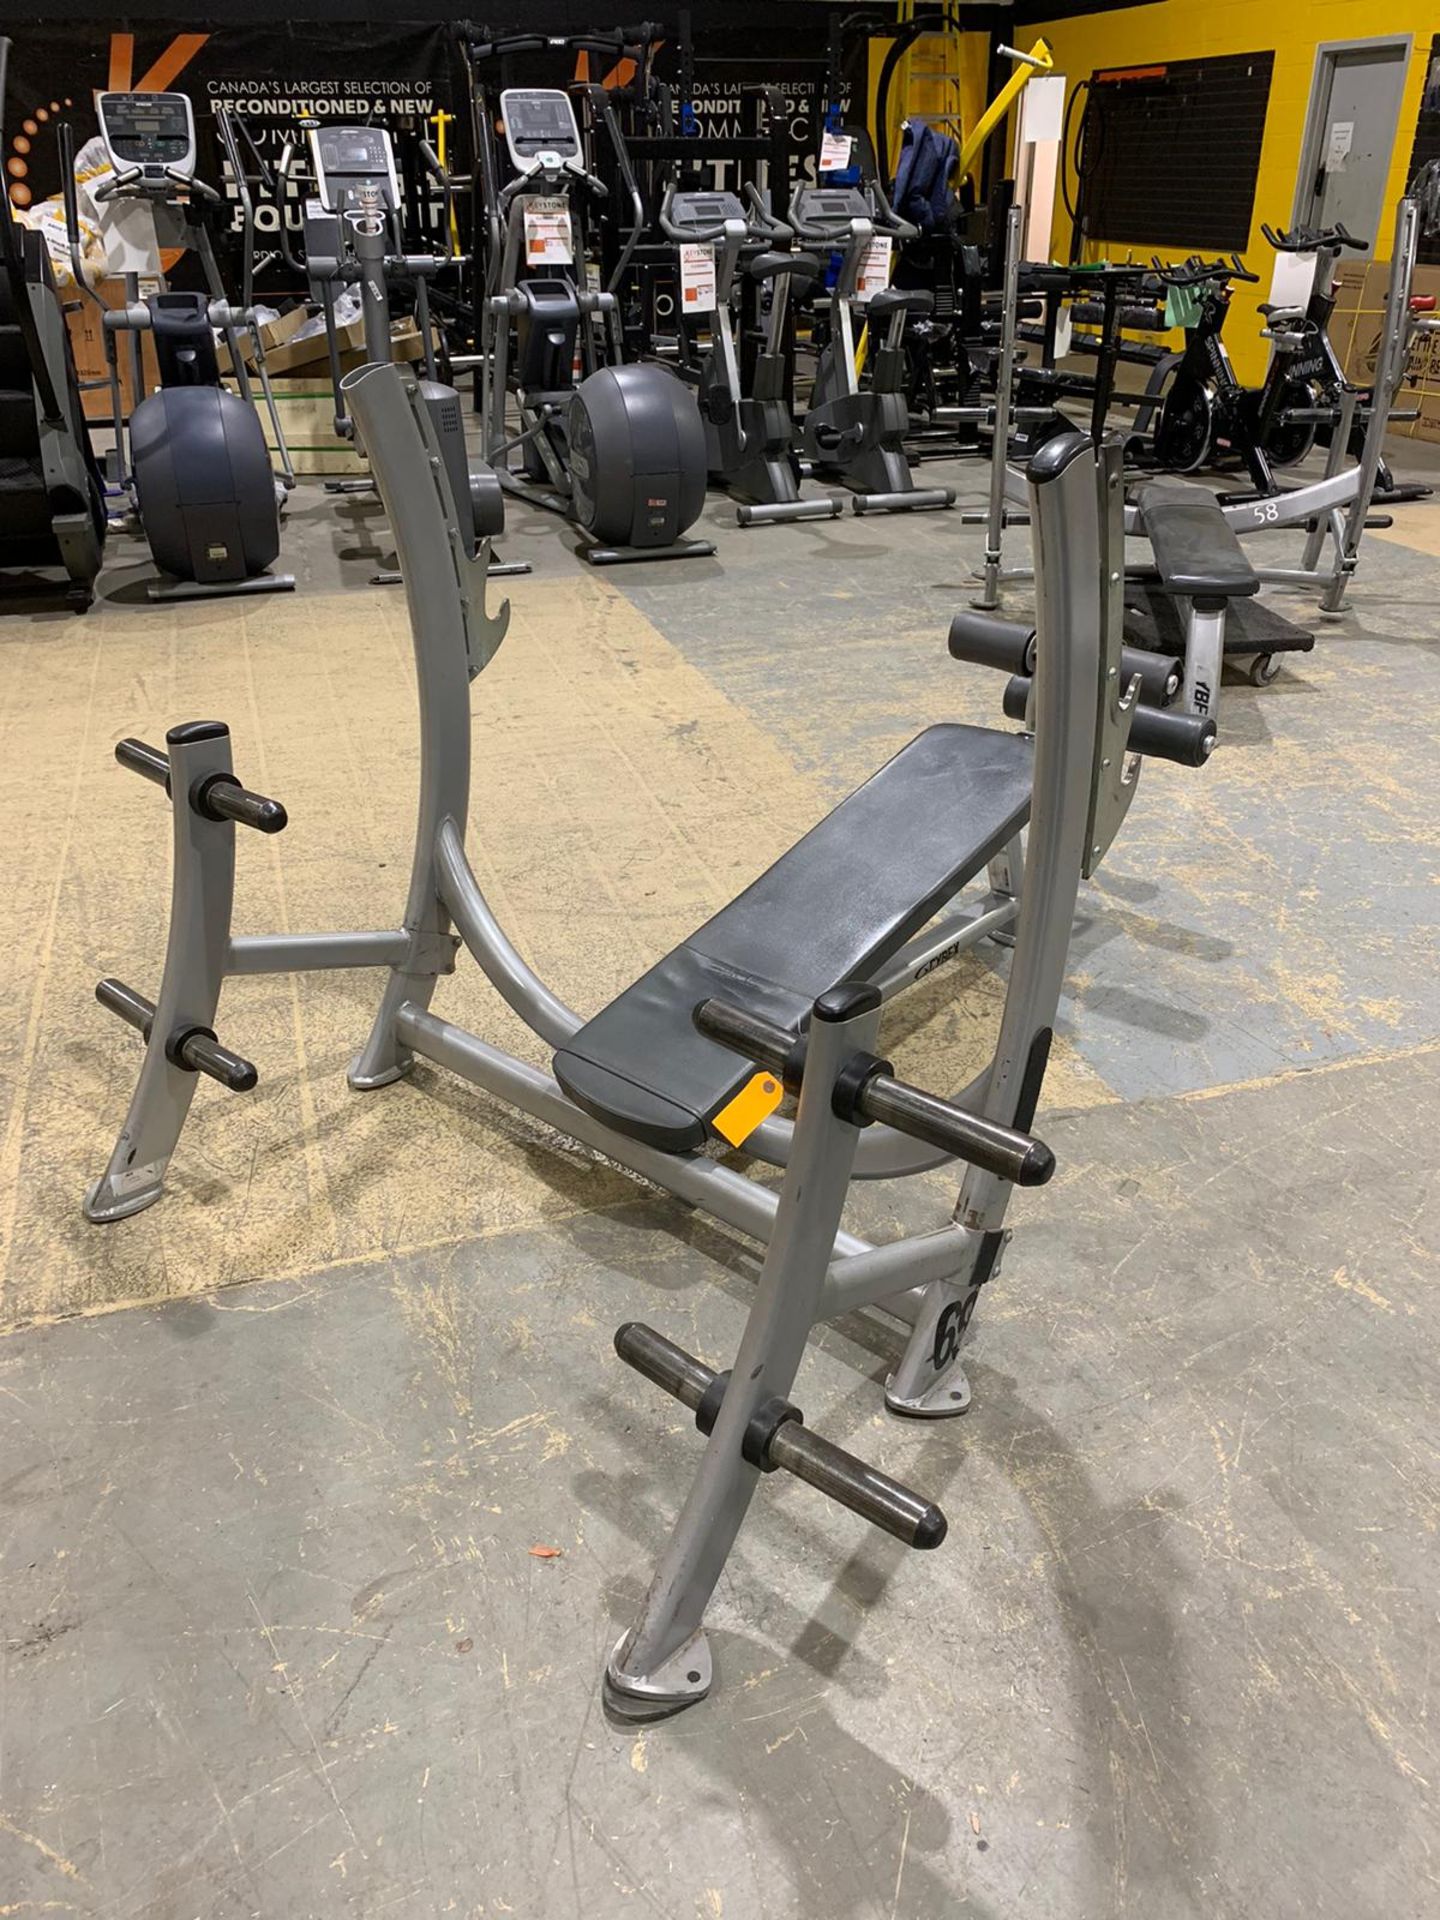 CYBEX OLYMPIC BENCH DECLINE BENCH - Image 3 of 4